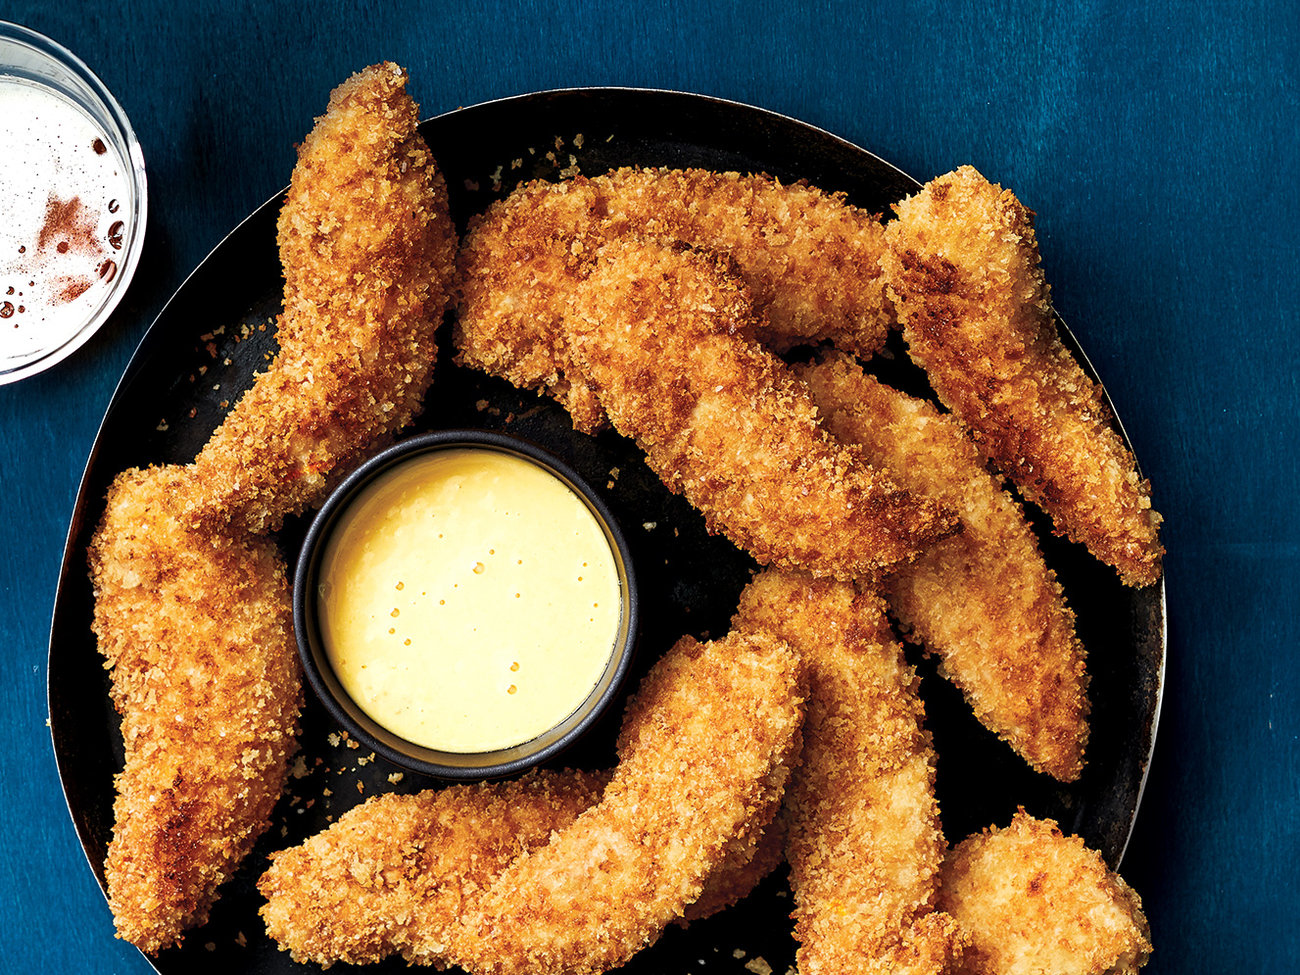 New and different recipes for making regular and spicy chicken strips at home, the KFC way